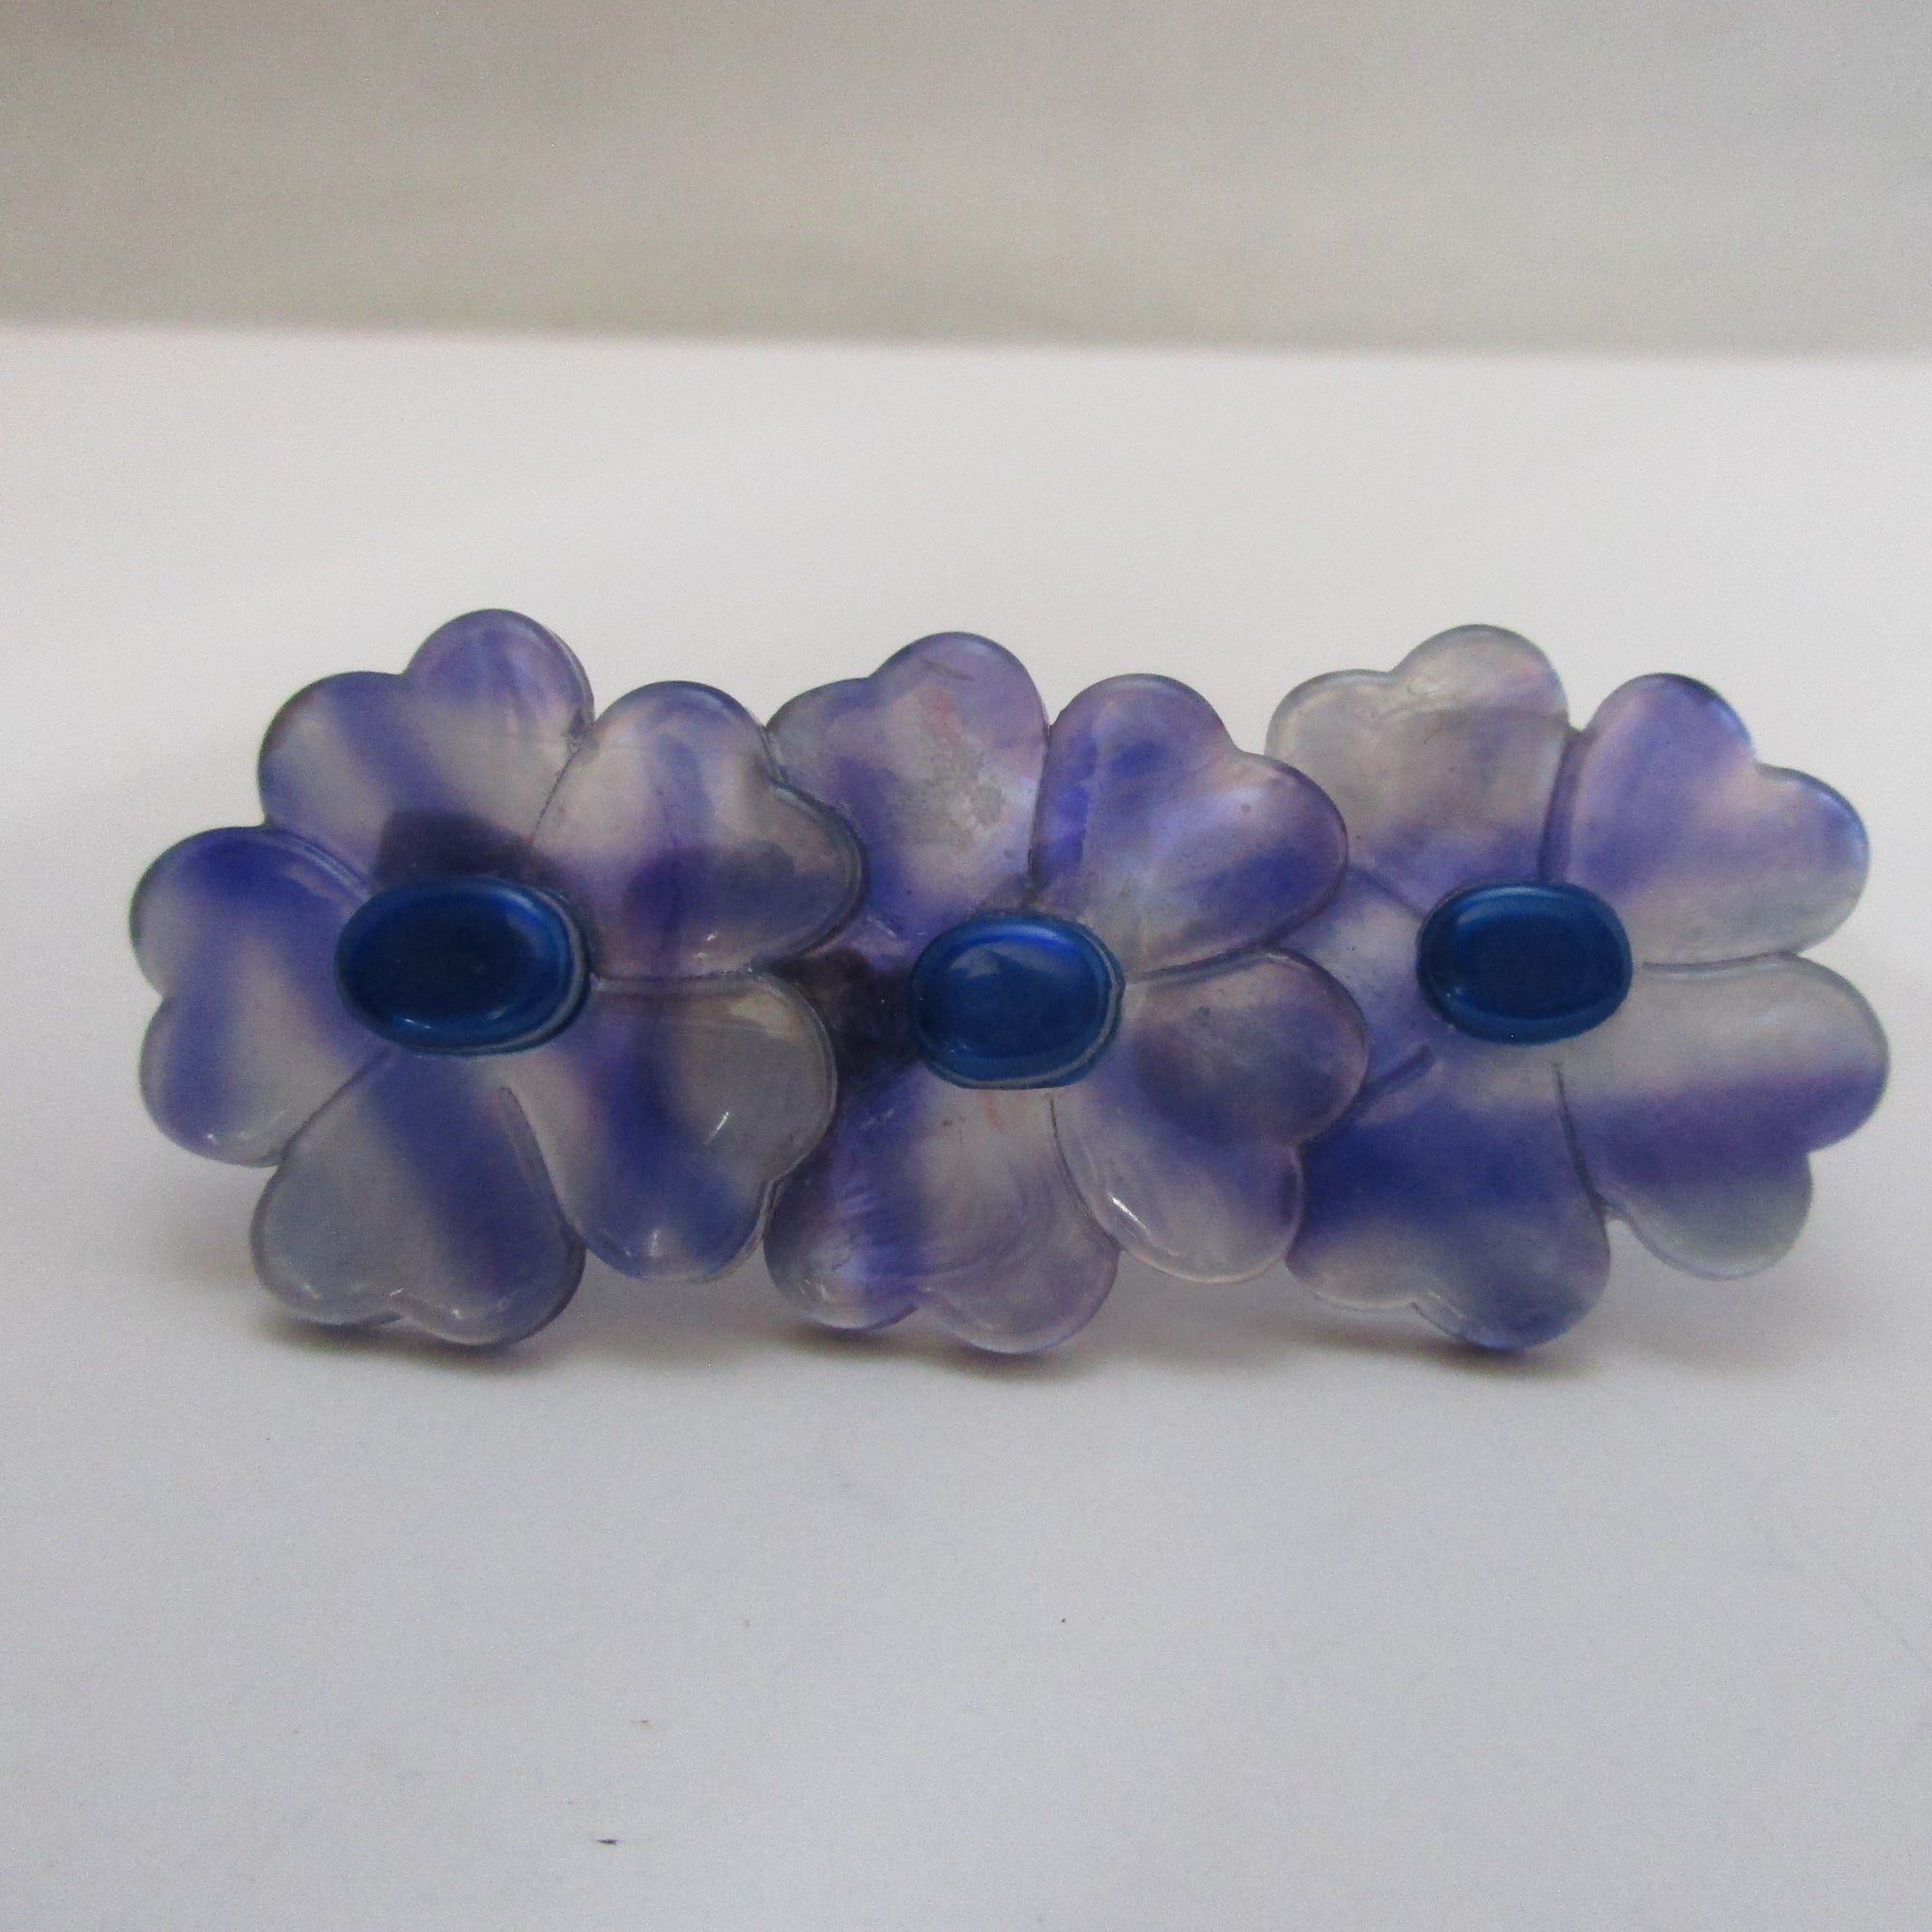 Lea Stein Celluloid Plastic Flower Brooch Pin Vintage French c1970.